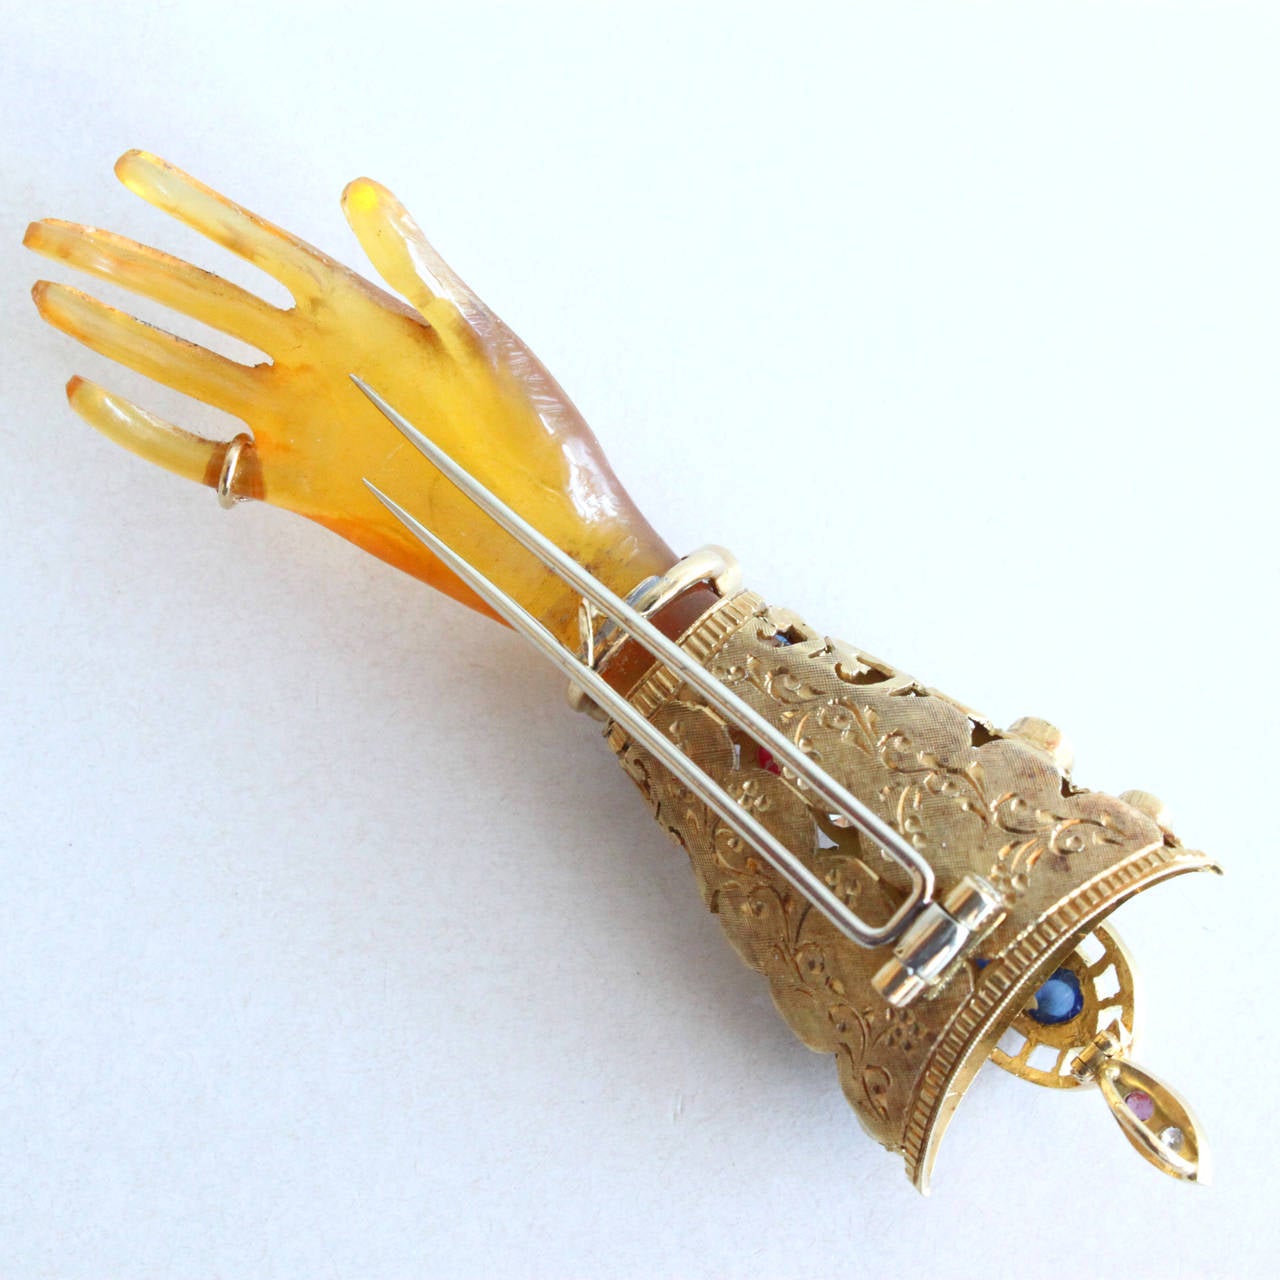 A beautiful pin/pedant by Nardi, depicting the Venetian symbol of a hand.

The hand is carved very realistically out of blond tortoise shell and is decorated with a small diamond ring on the pinky finger; a movable ruby and diamond bracelet; and a